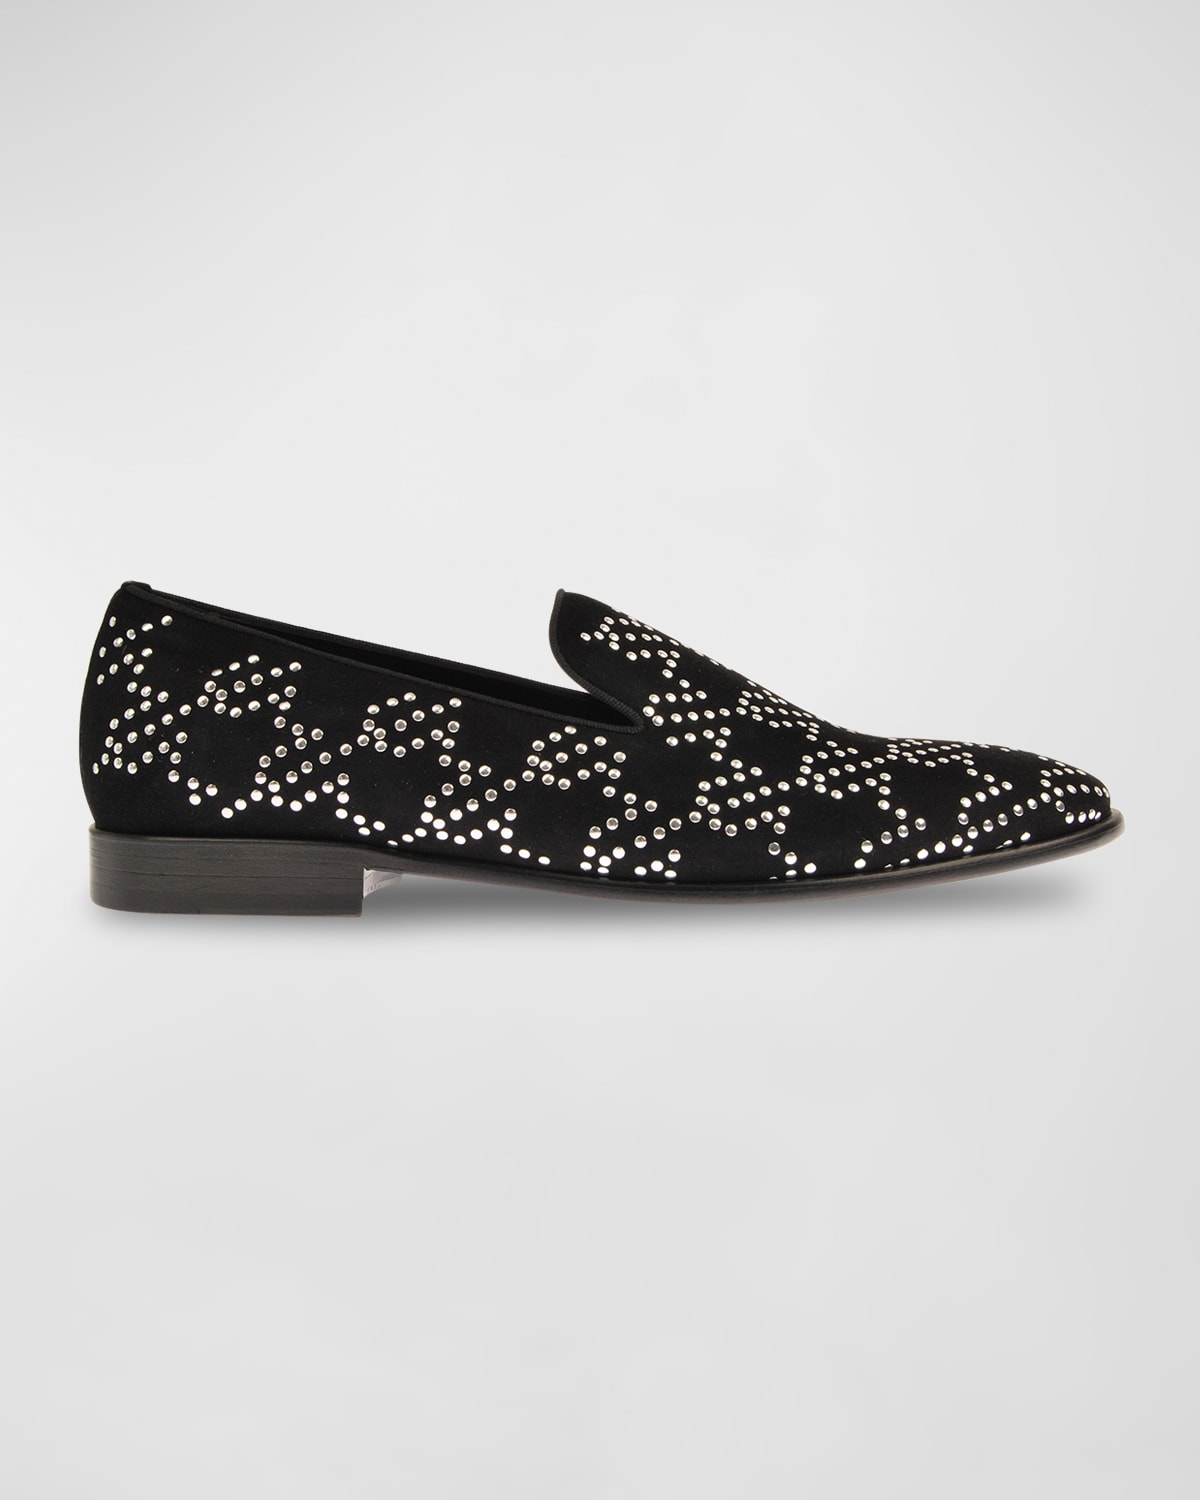 Men's Studded Suede Smoking Slippers